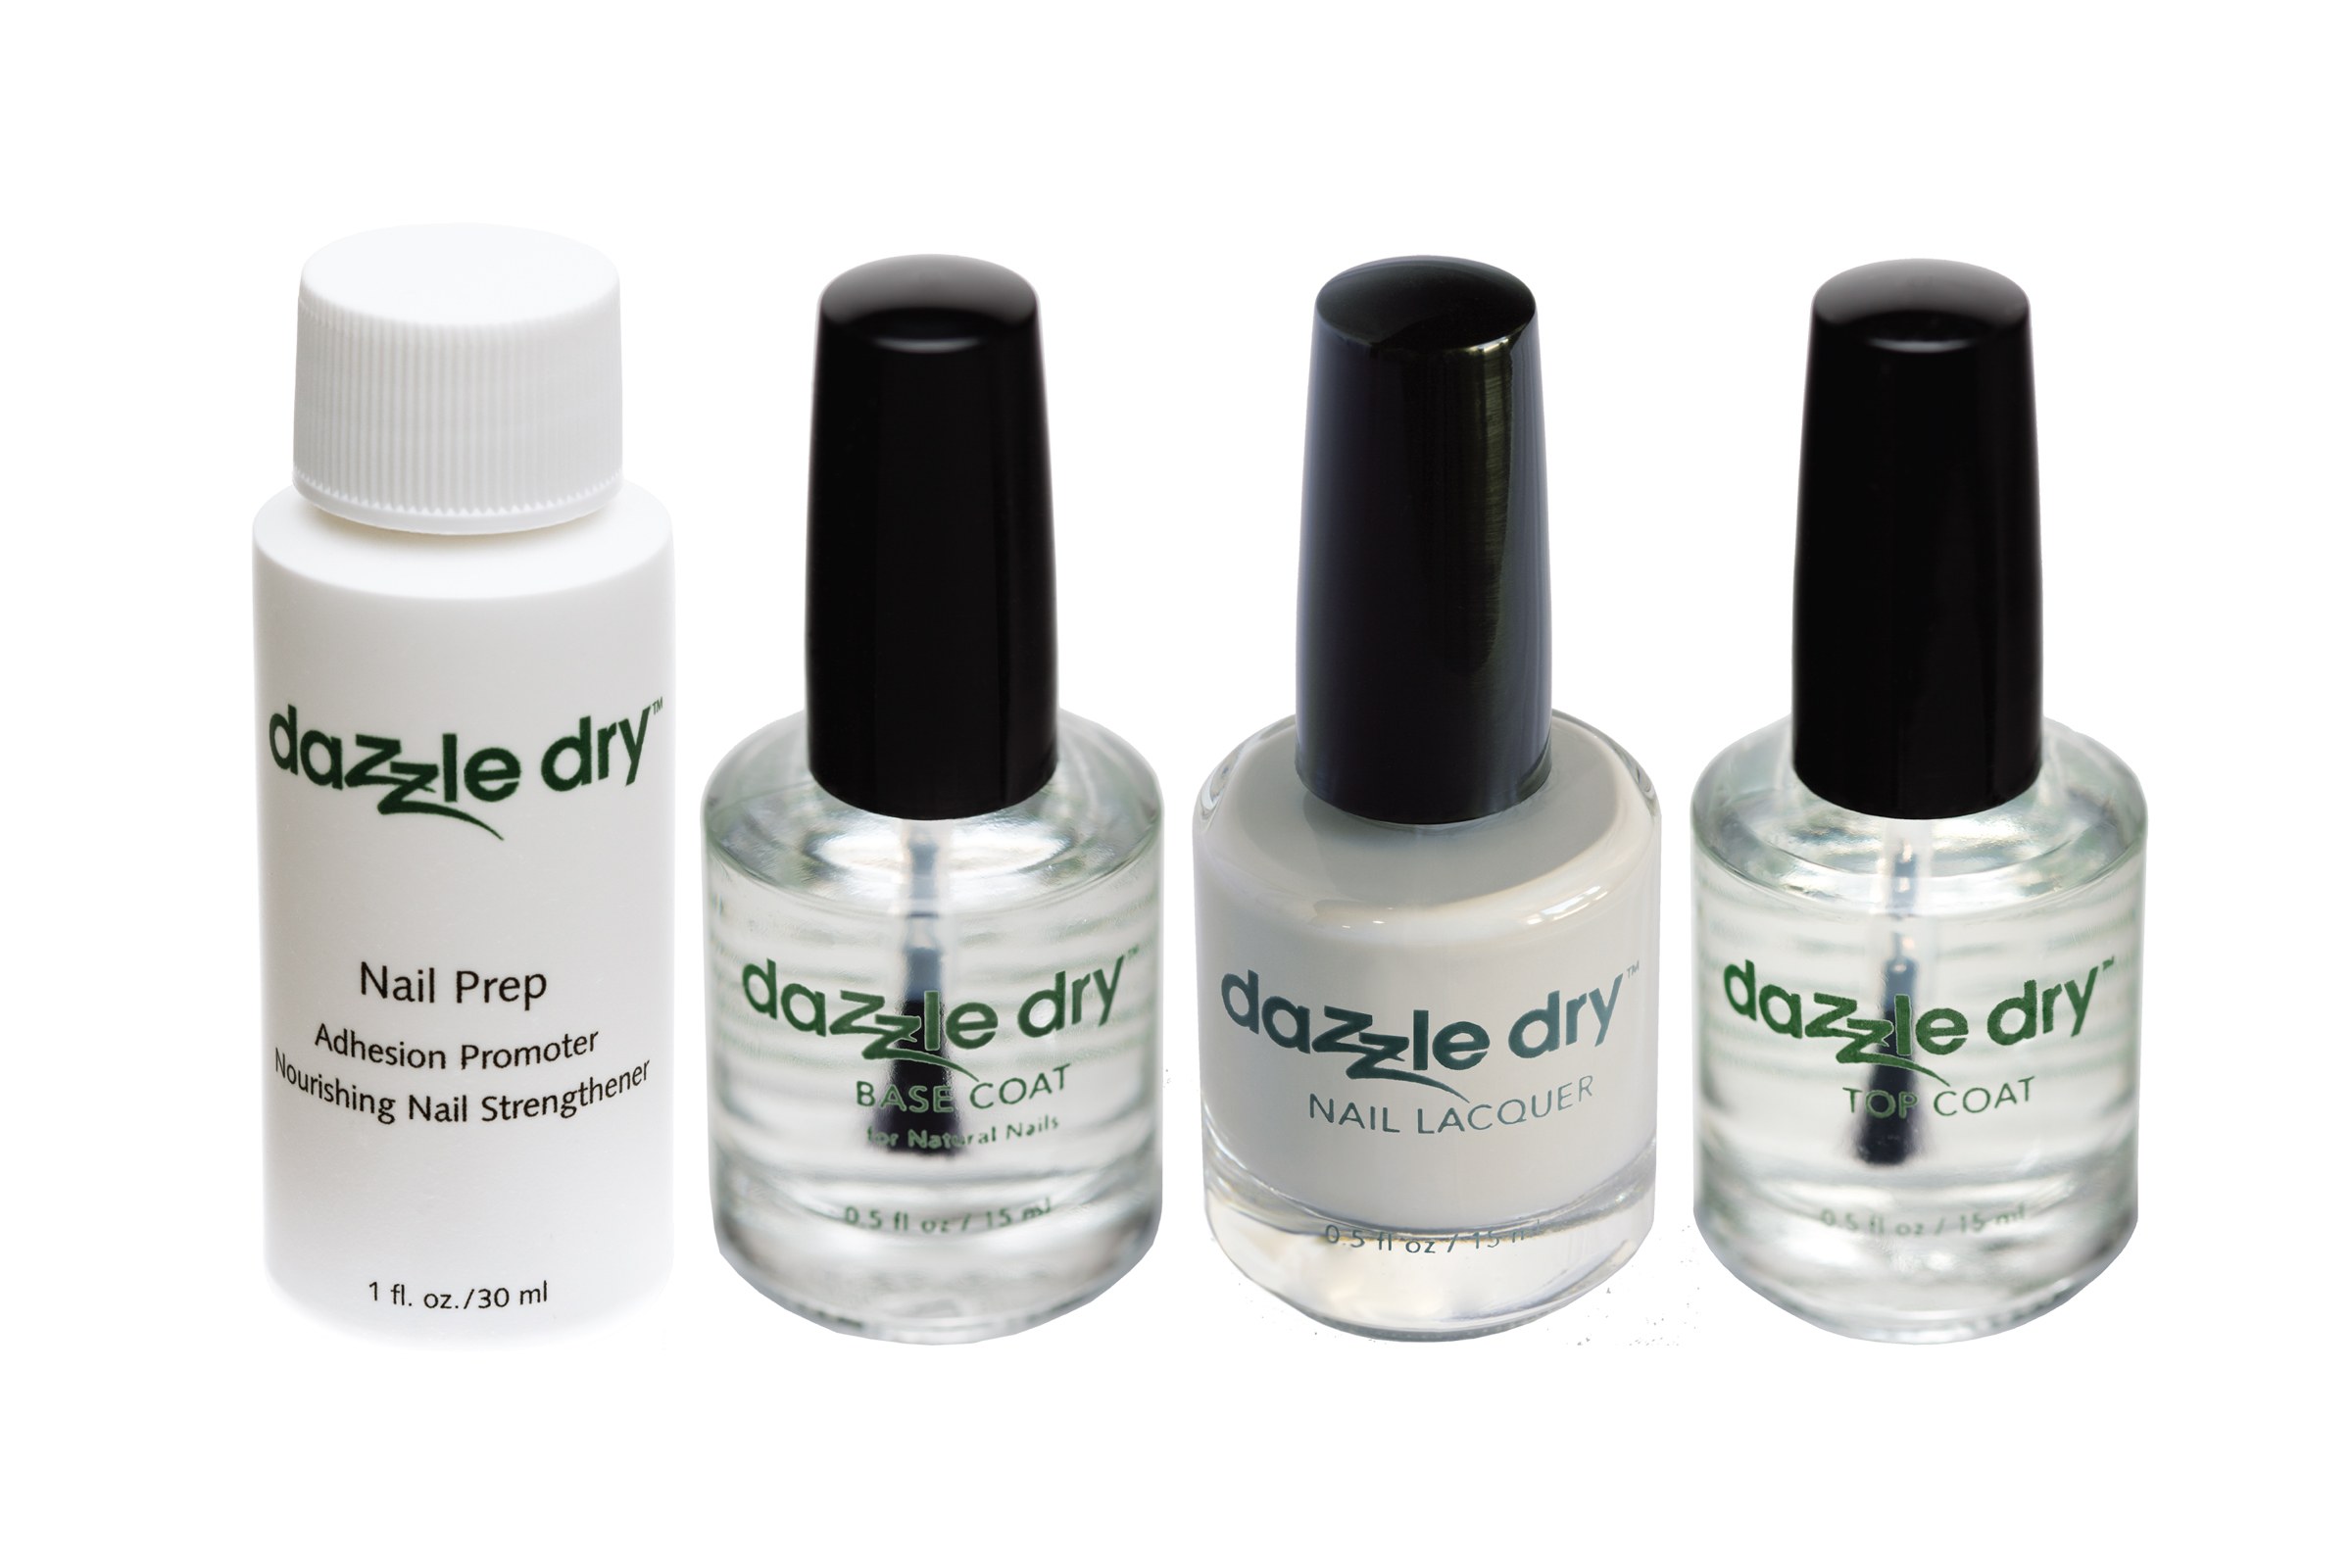 Dazzle Dry nail polish launches! - Professional Beauty